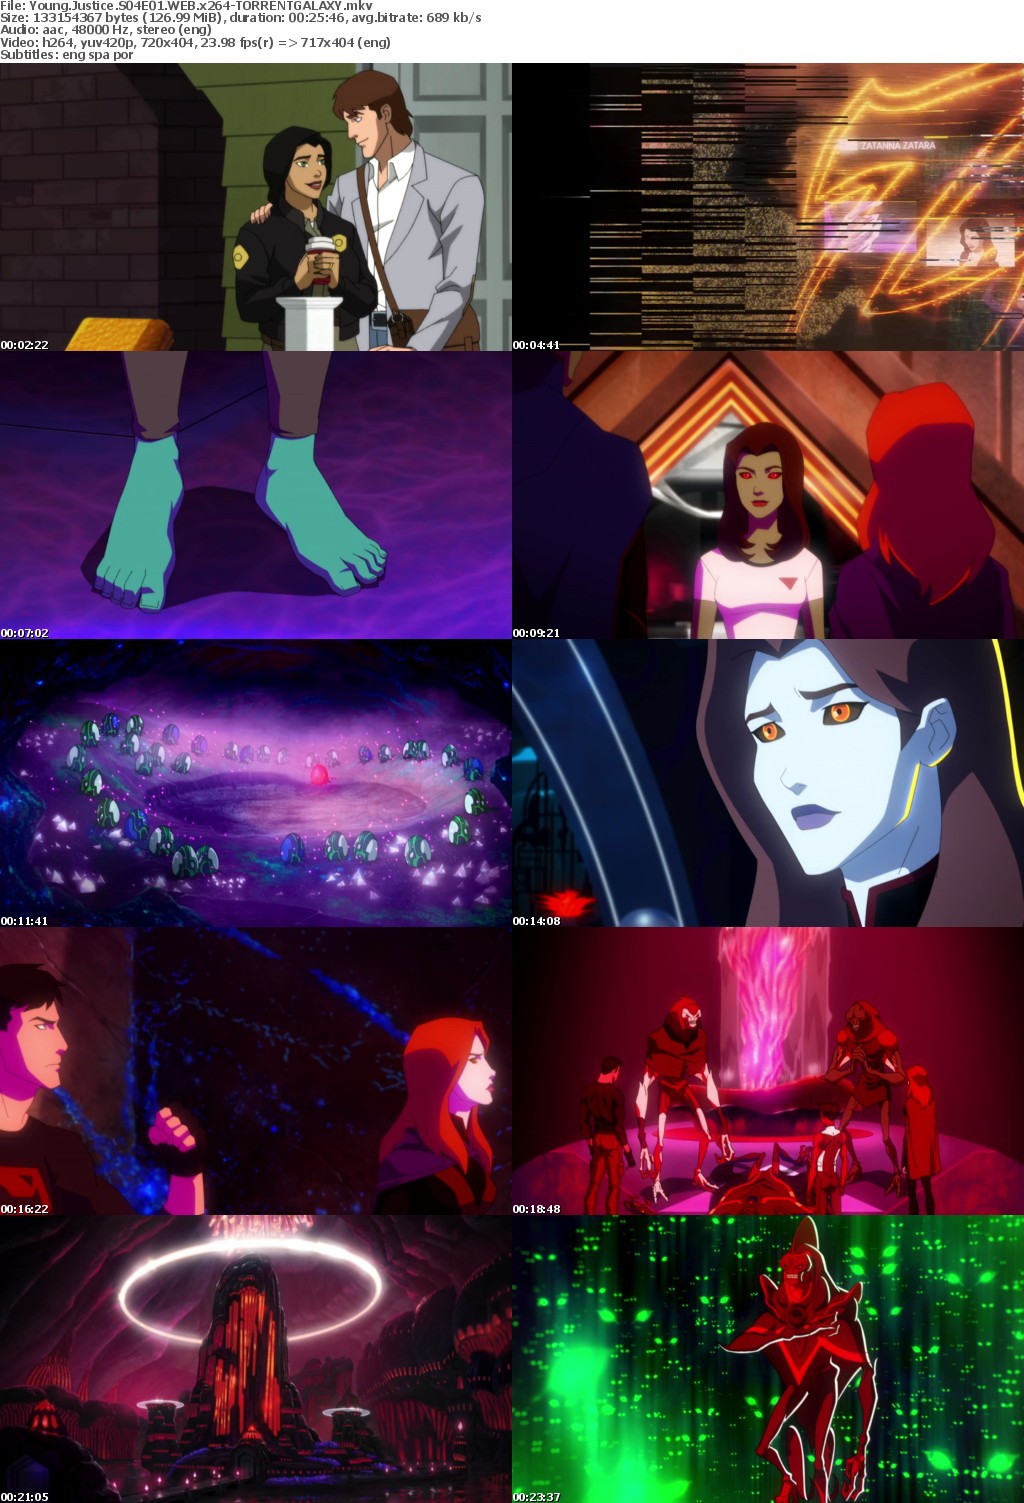 Young Justice S04E01 WEB x264-GALAXY